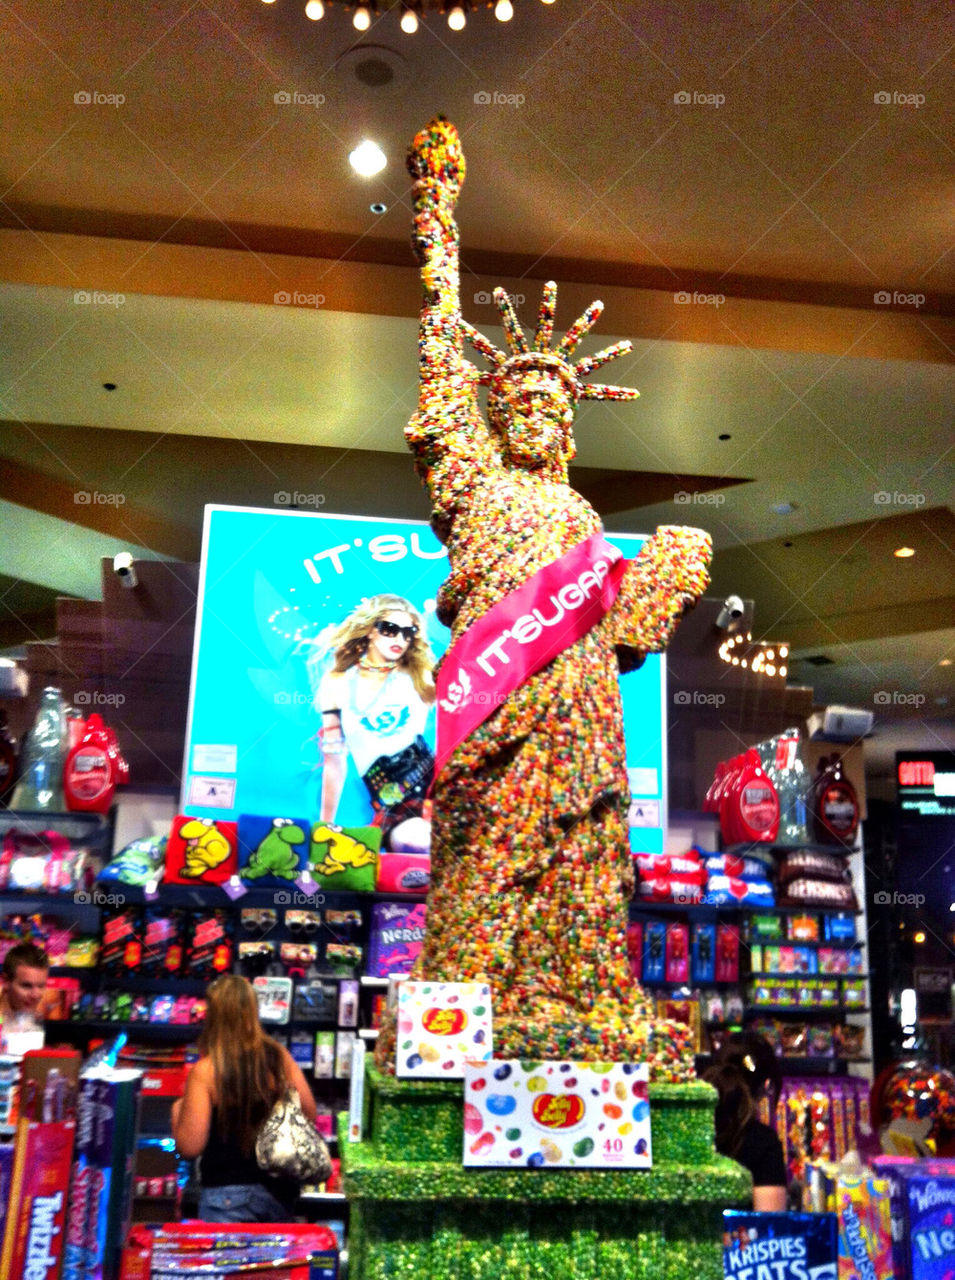 Statue of Liberty made of sweets